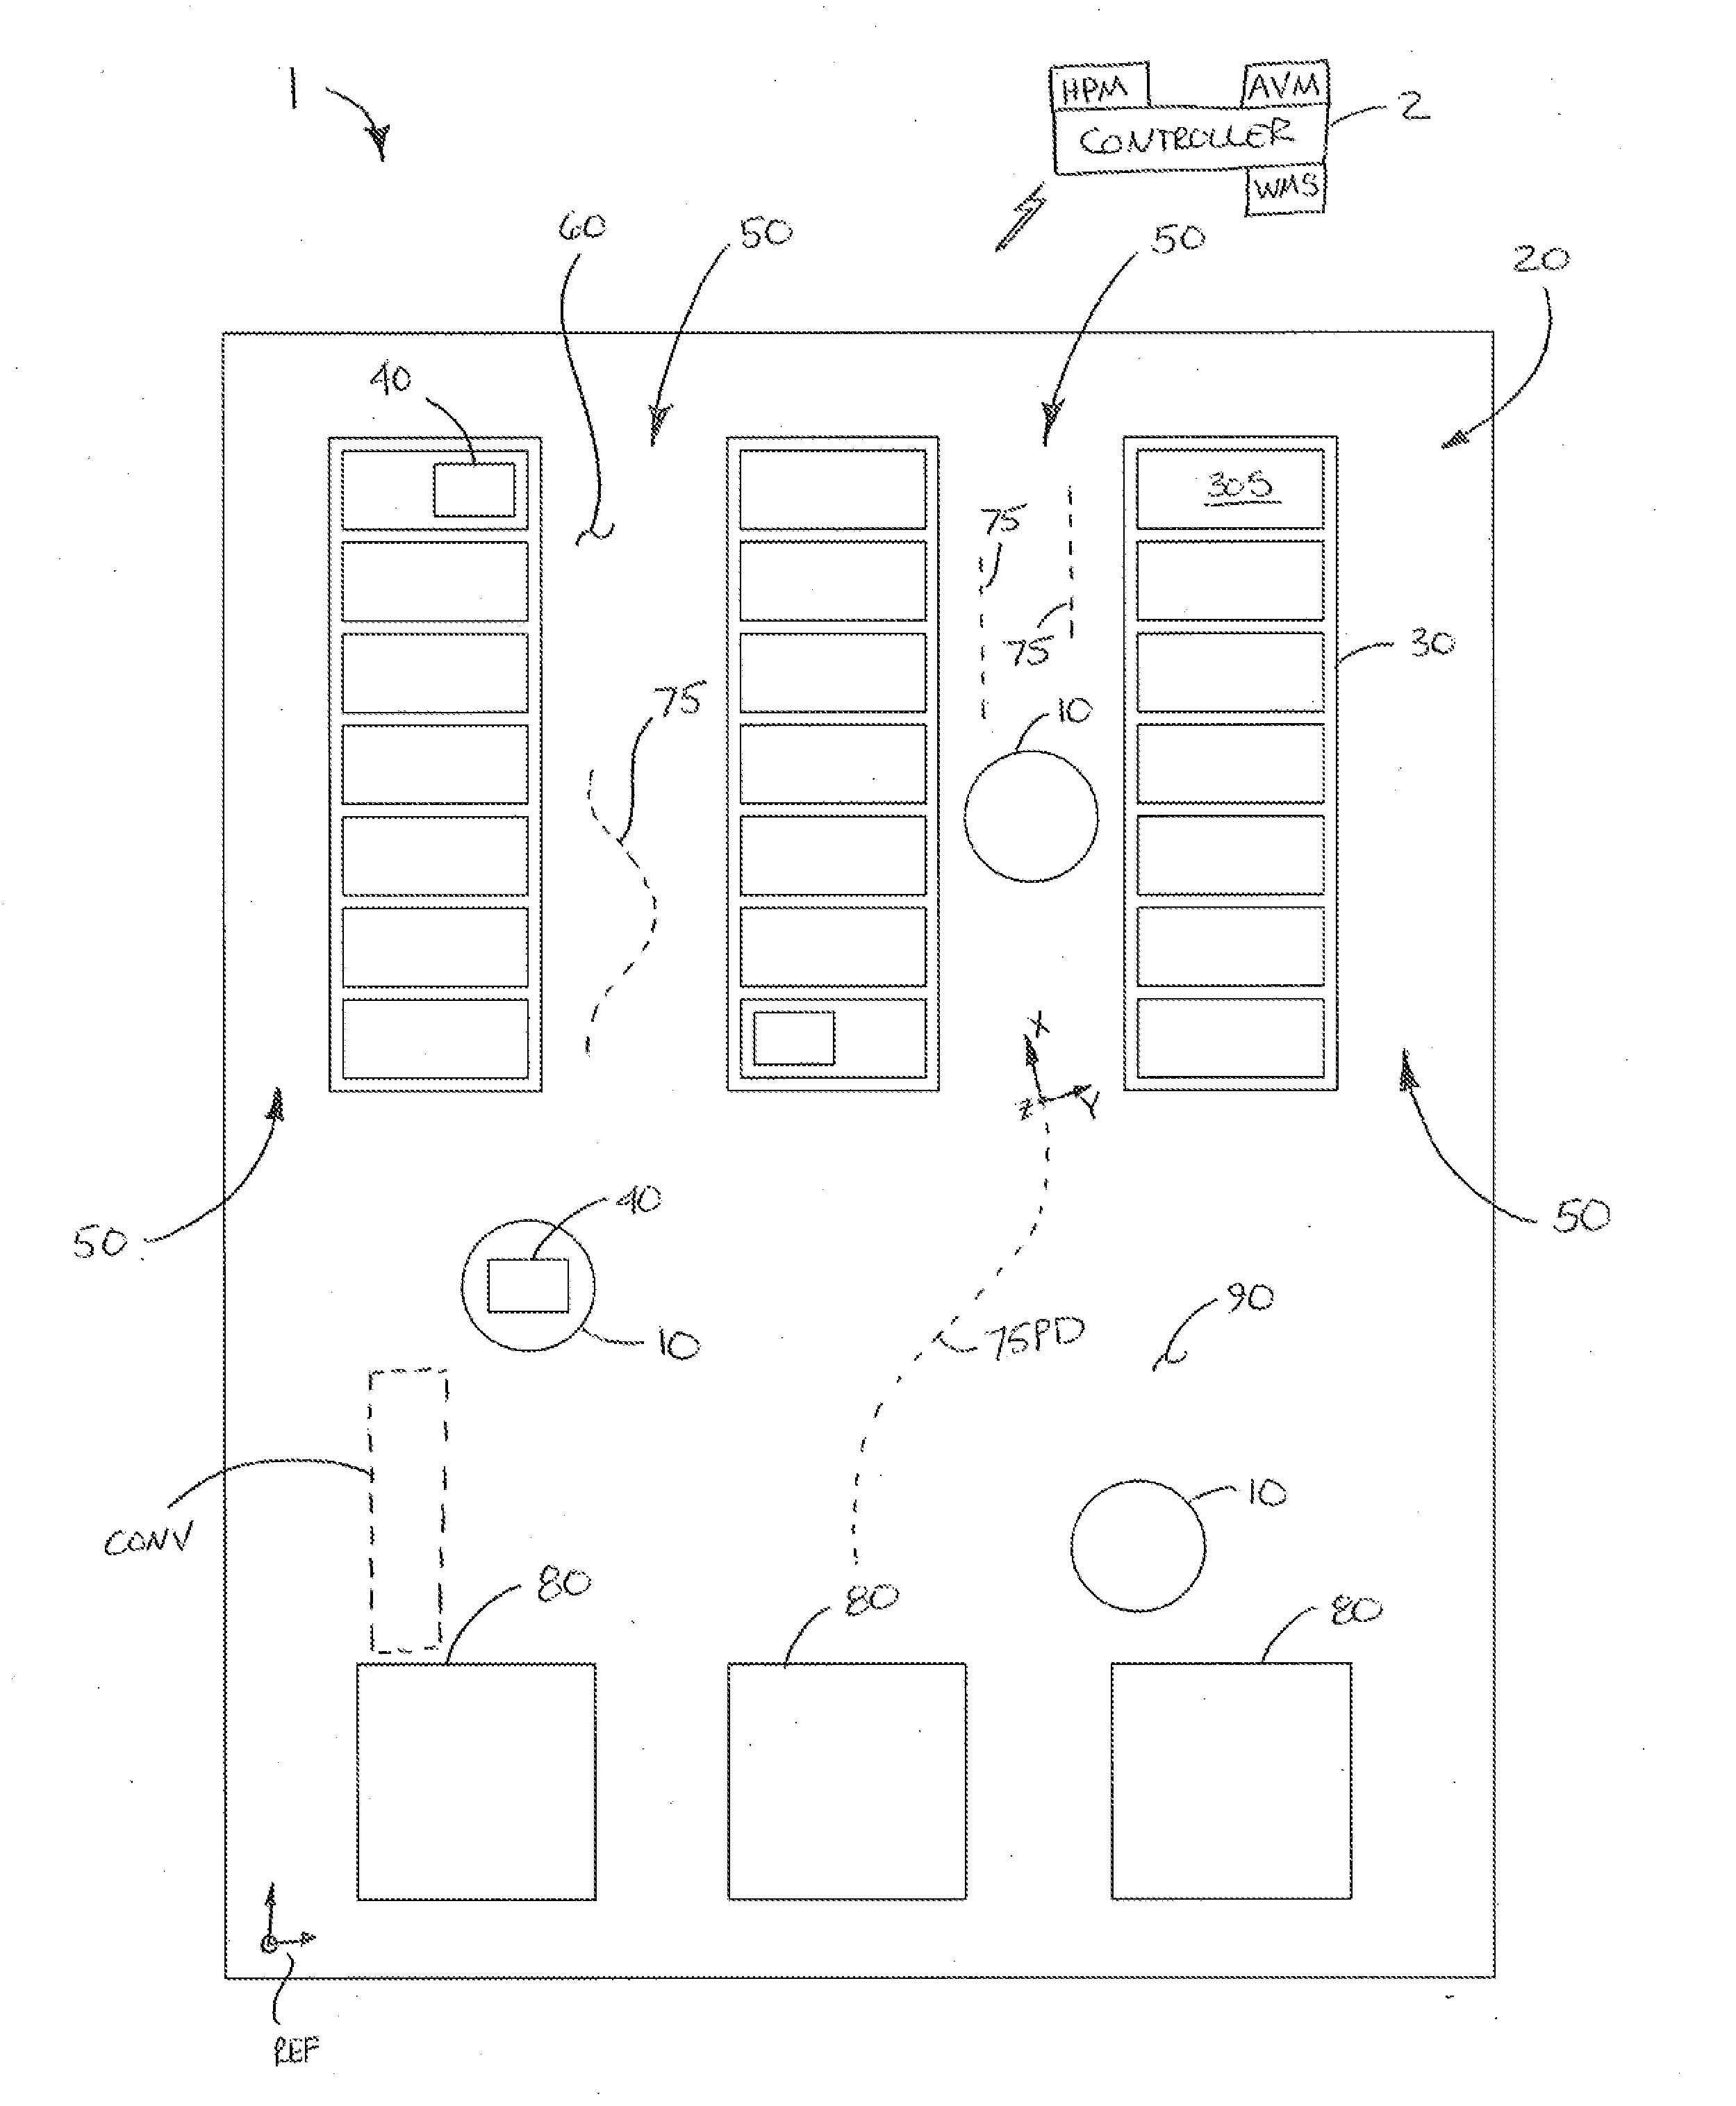 Method and system for automated transport of items